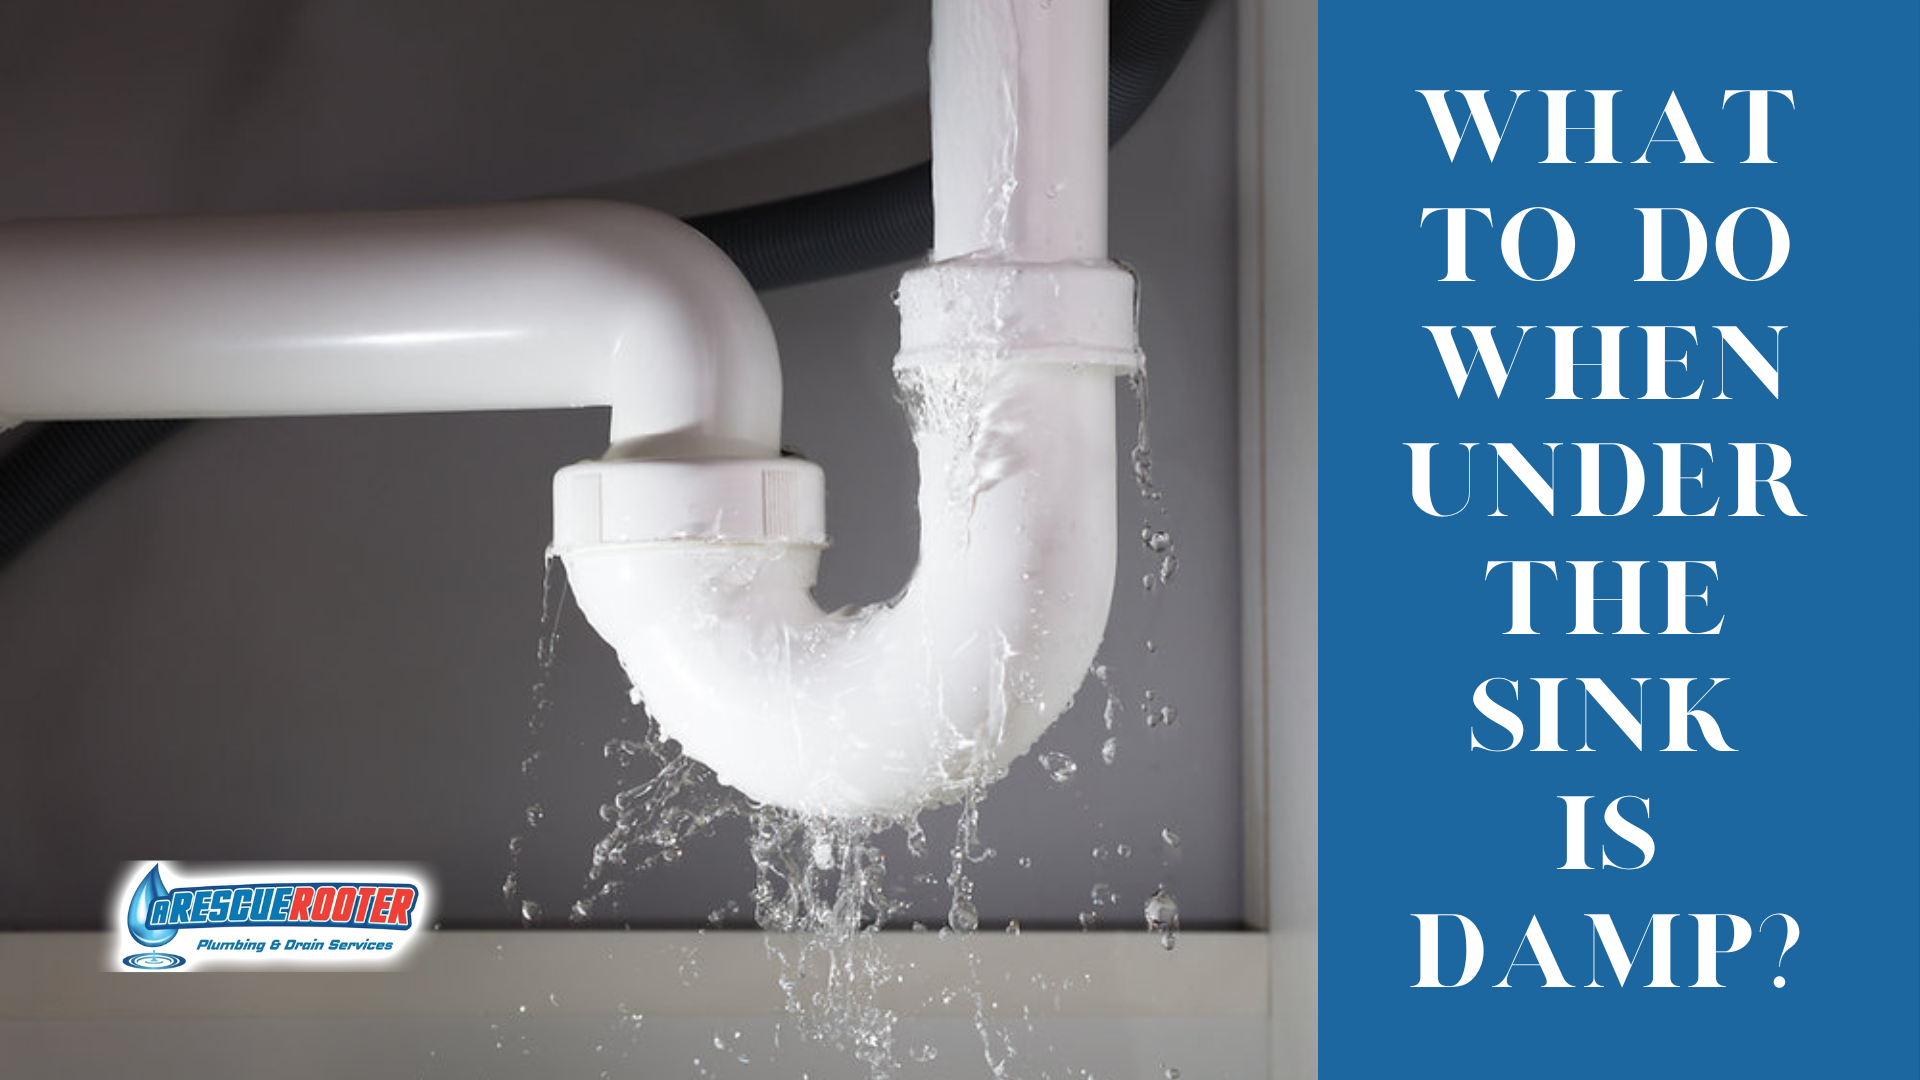 what to do when under the sink is damp